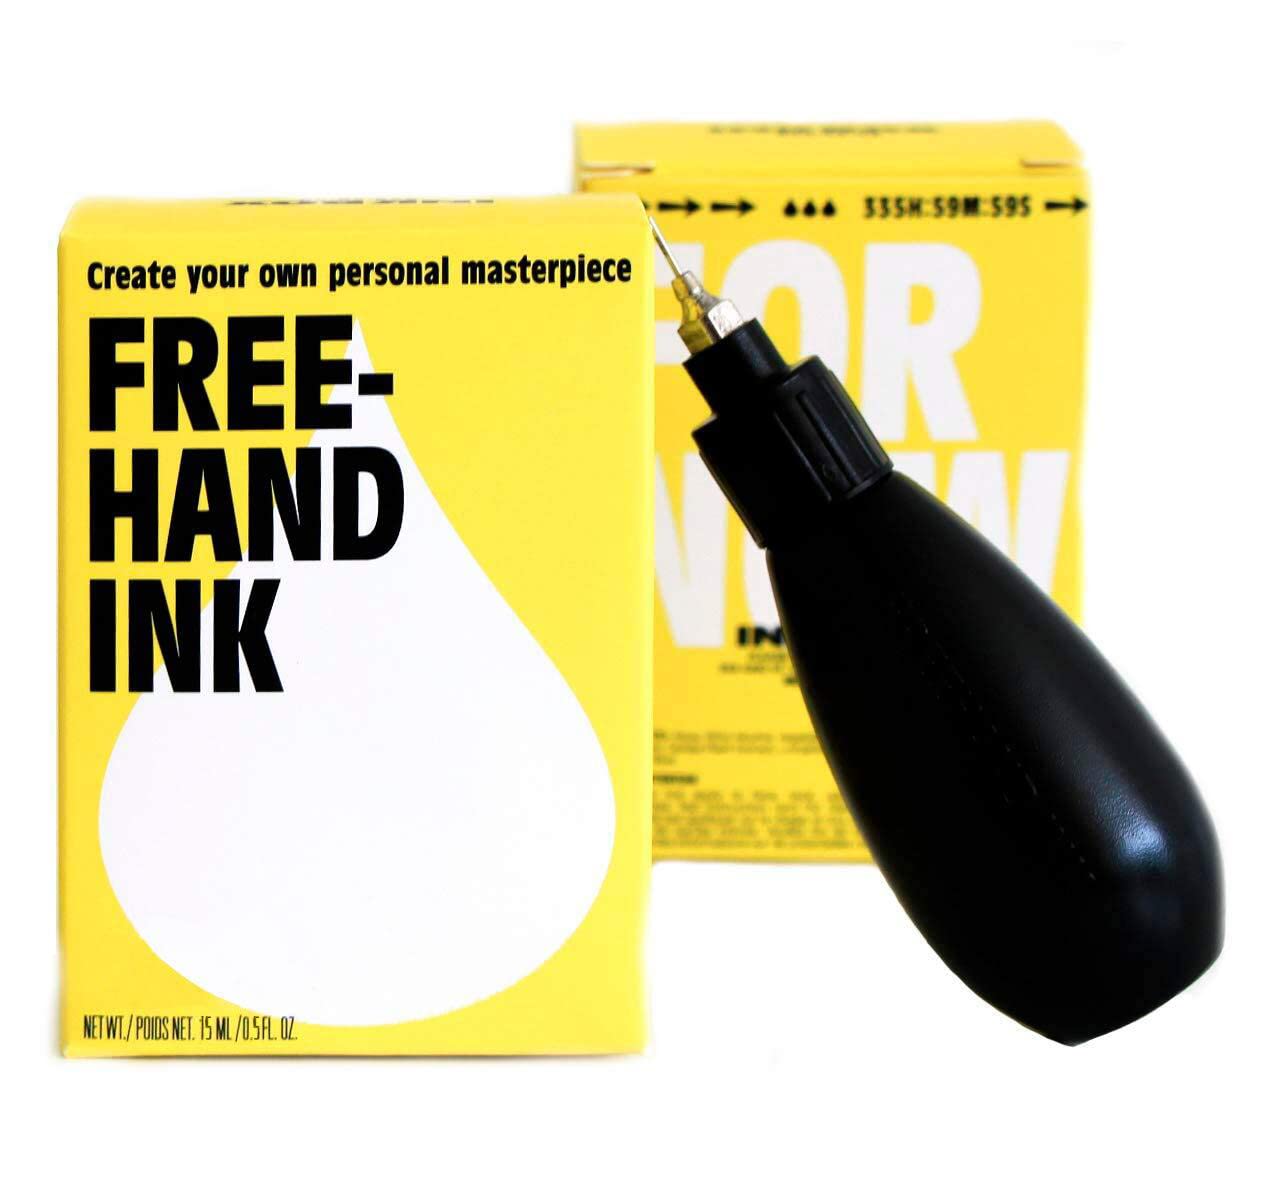 Inkbox Freehand Ink Temporary Tattoos | Lasts Up to 2 Weeks | best for Artists, Long Lasting Temp Kit Tattoos, and Temporary Tat